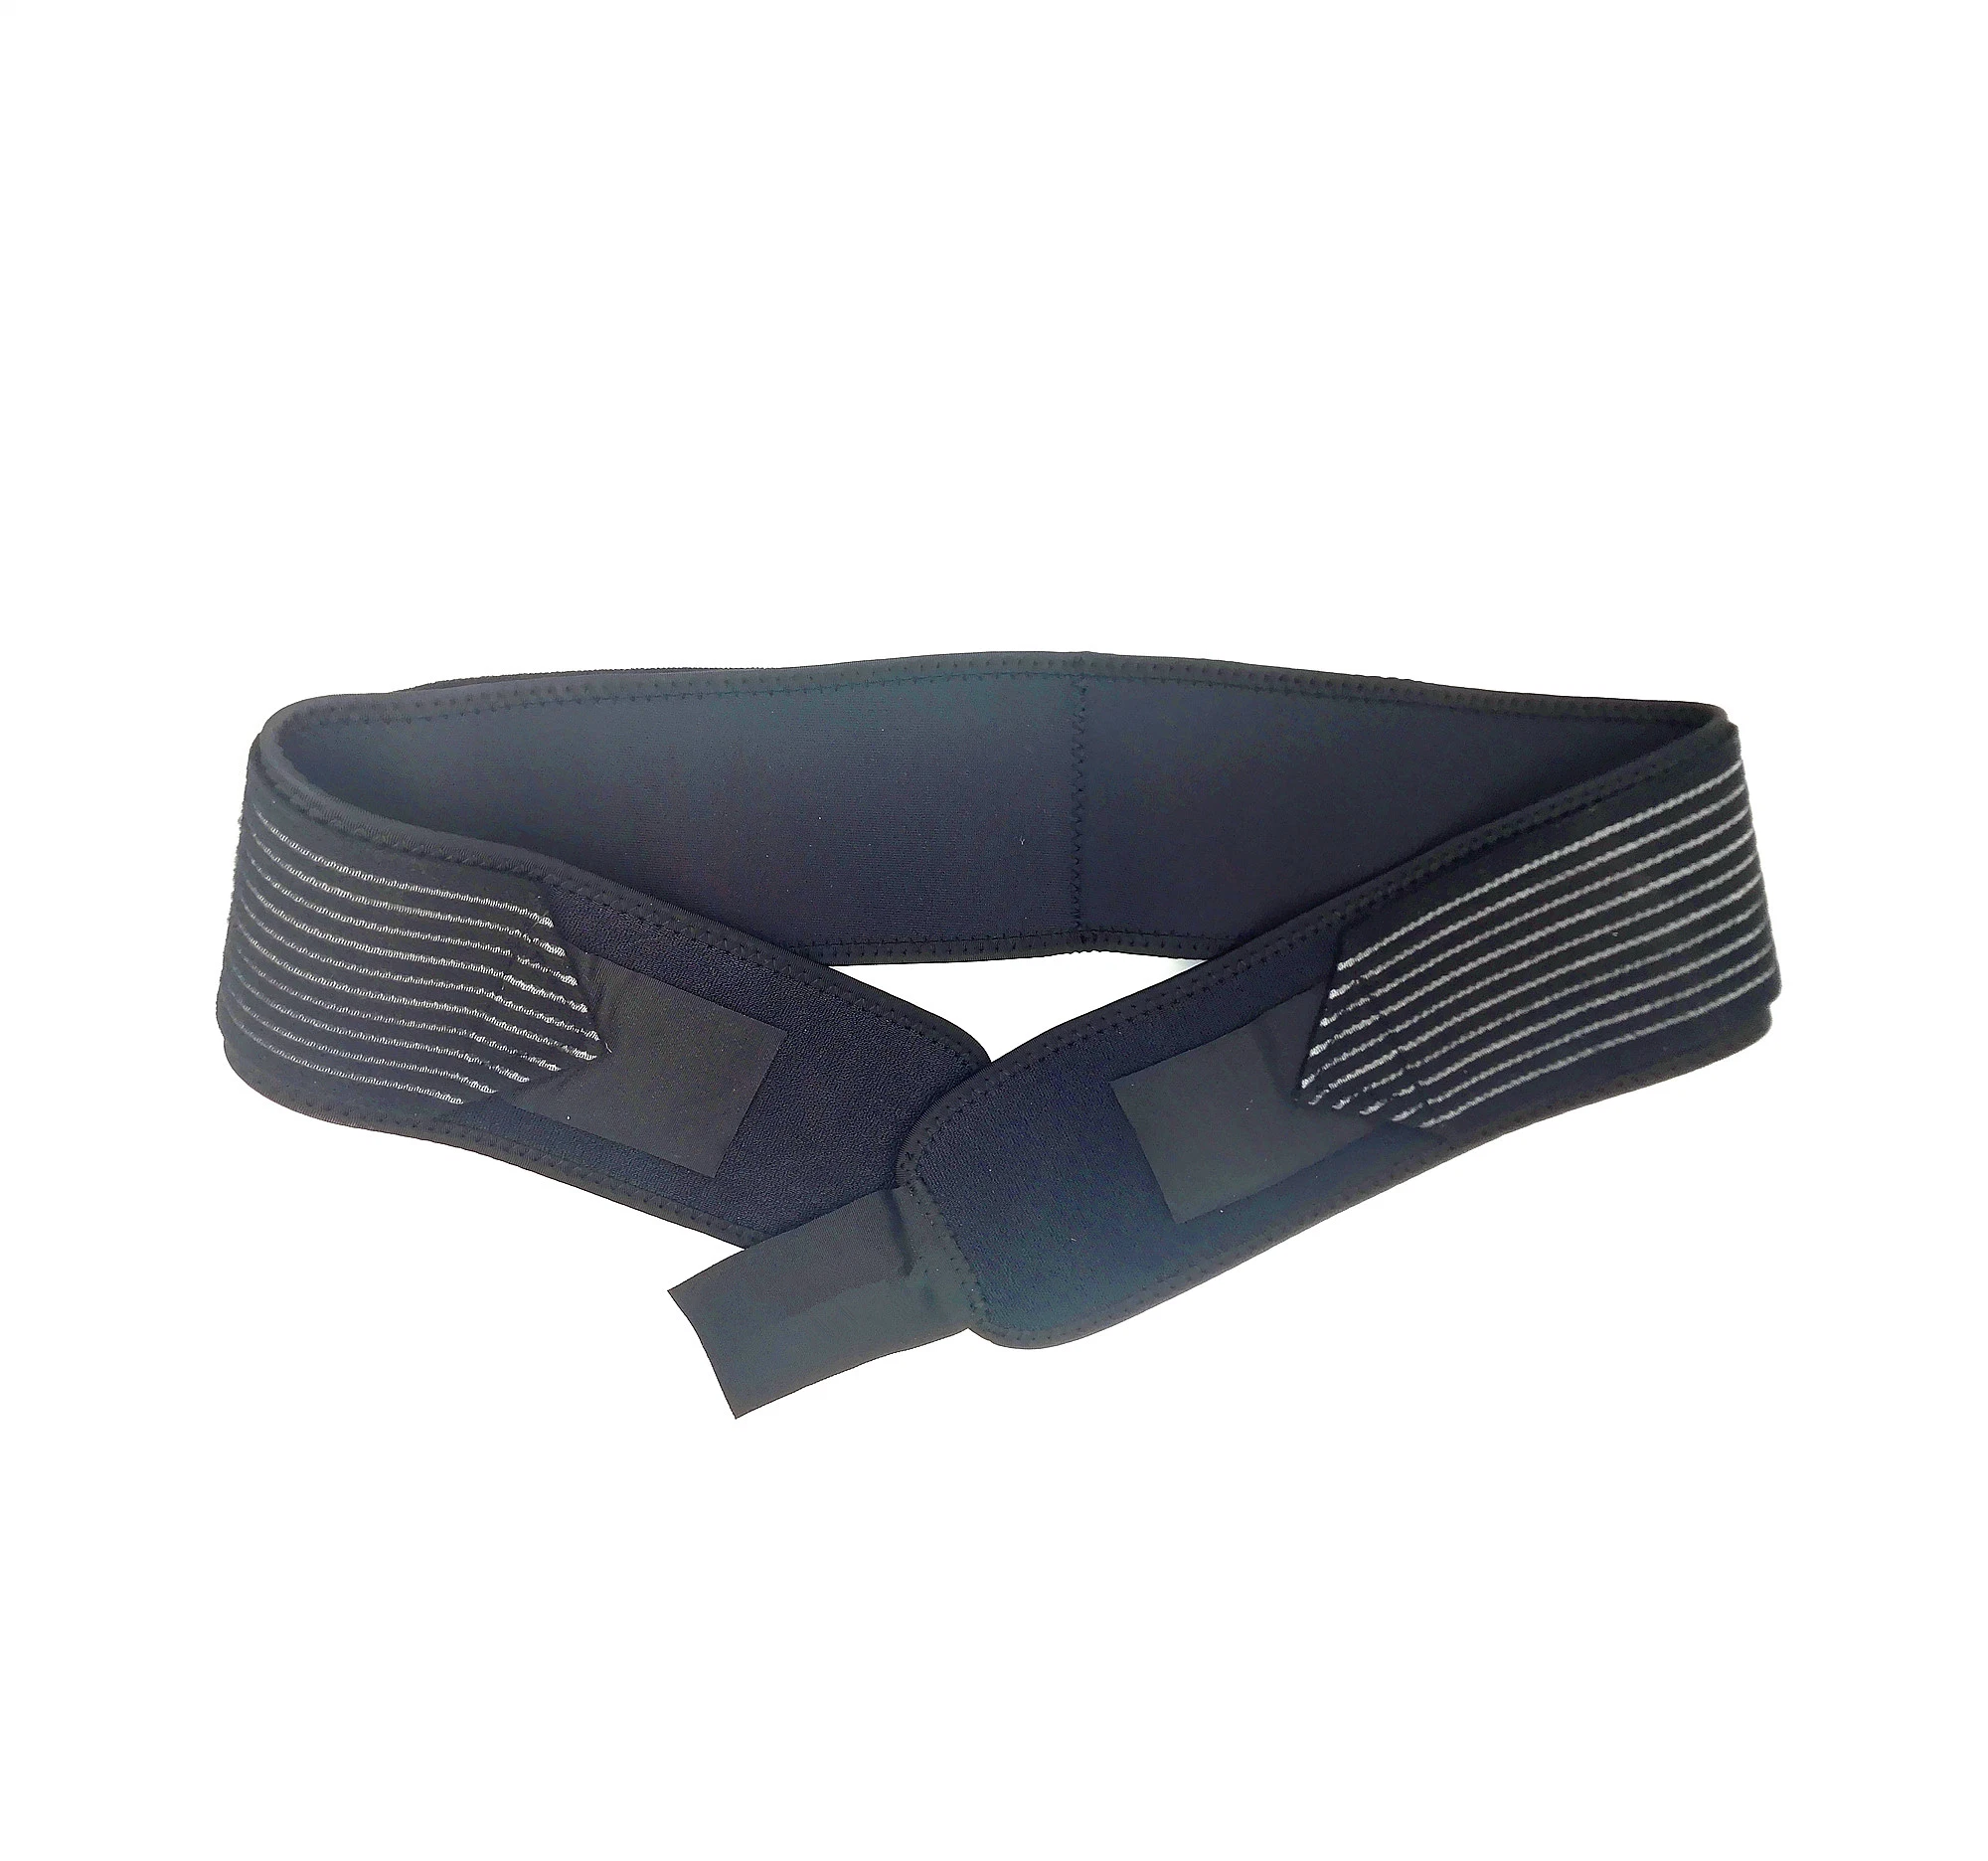 Adjustable Si Joint Support Belt for Support Your Pelvis and Lower Back